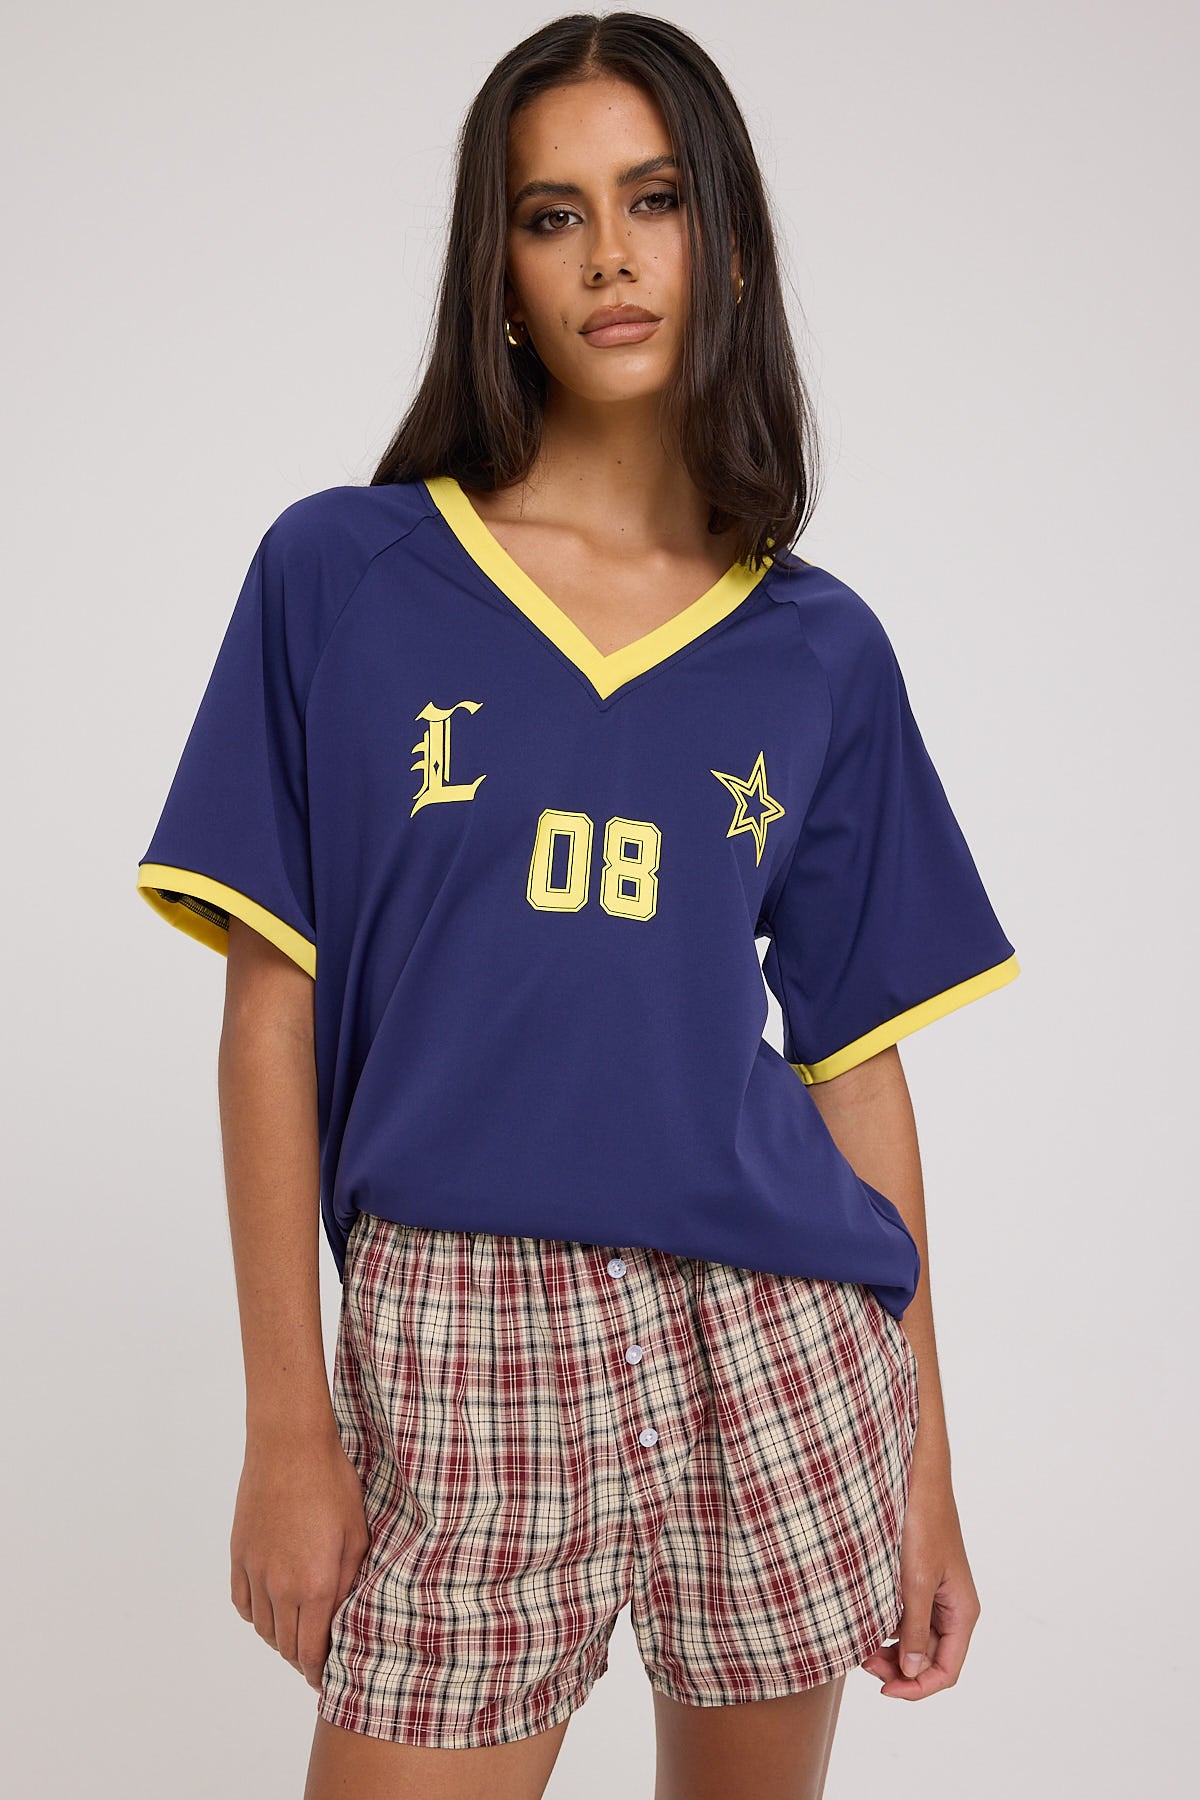 Lioness Spectate Jersey Top Navy